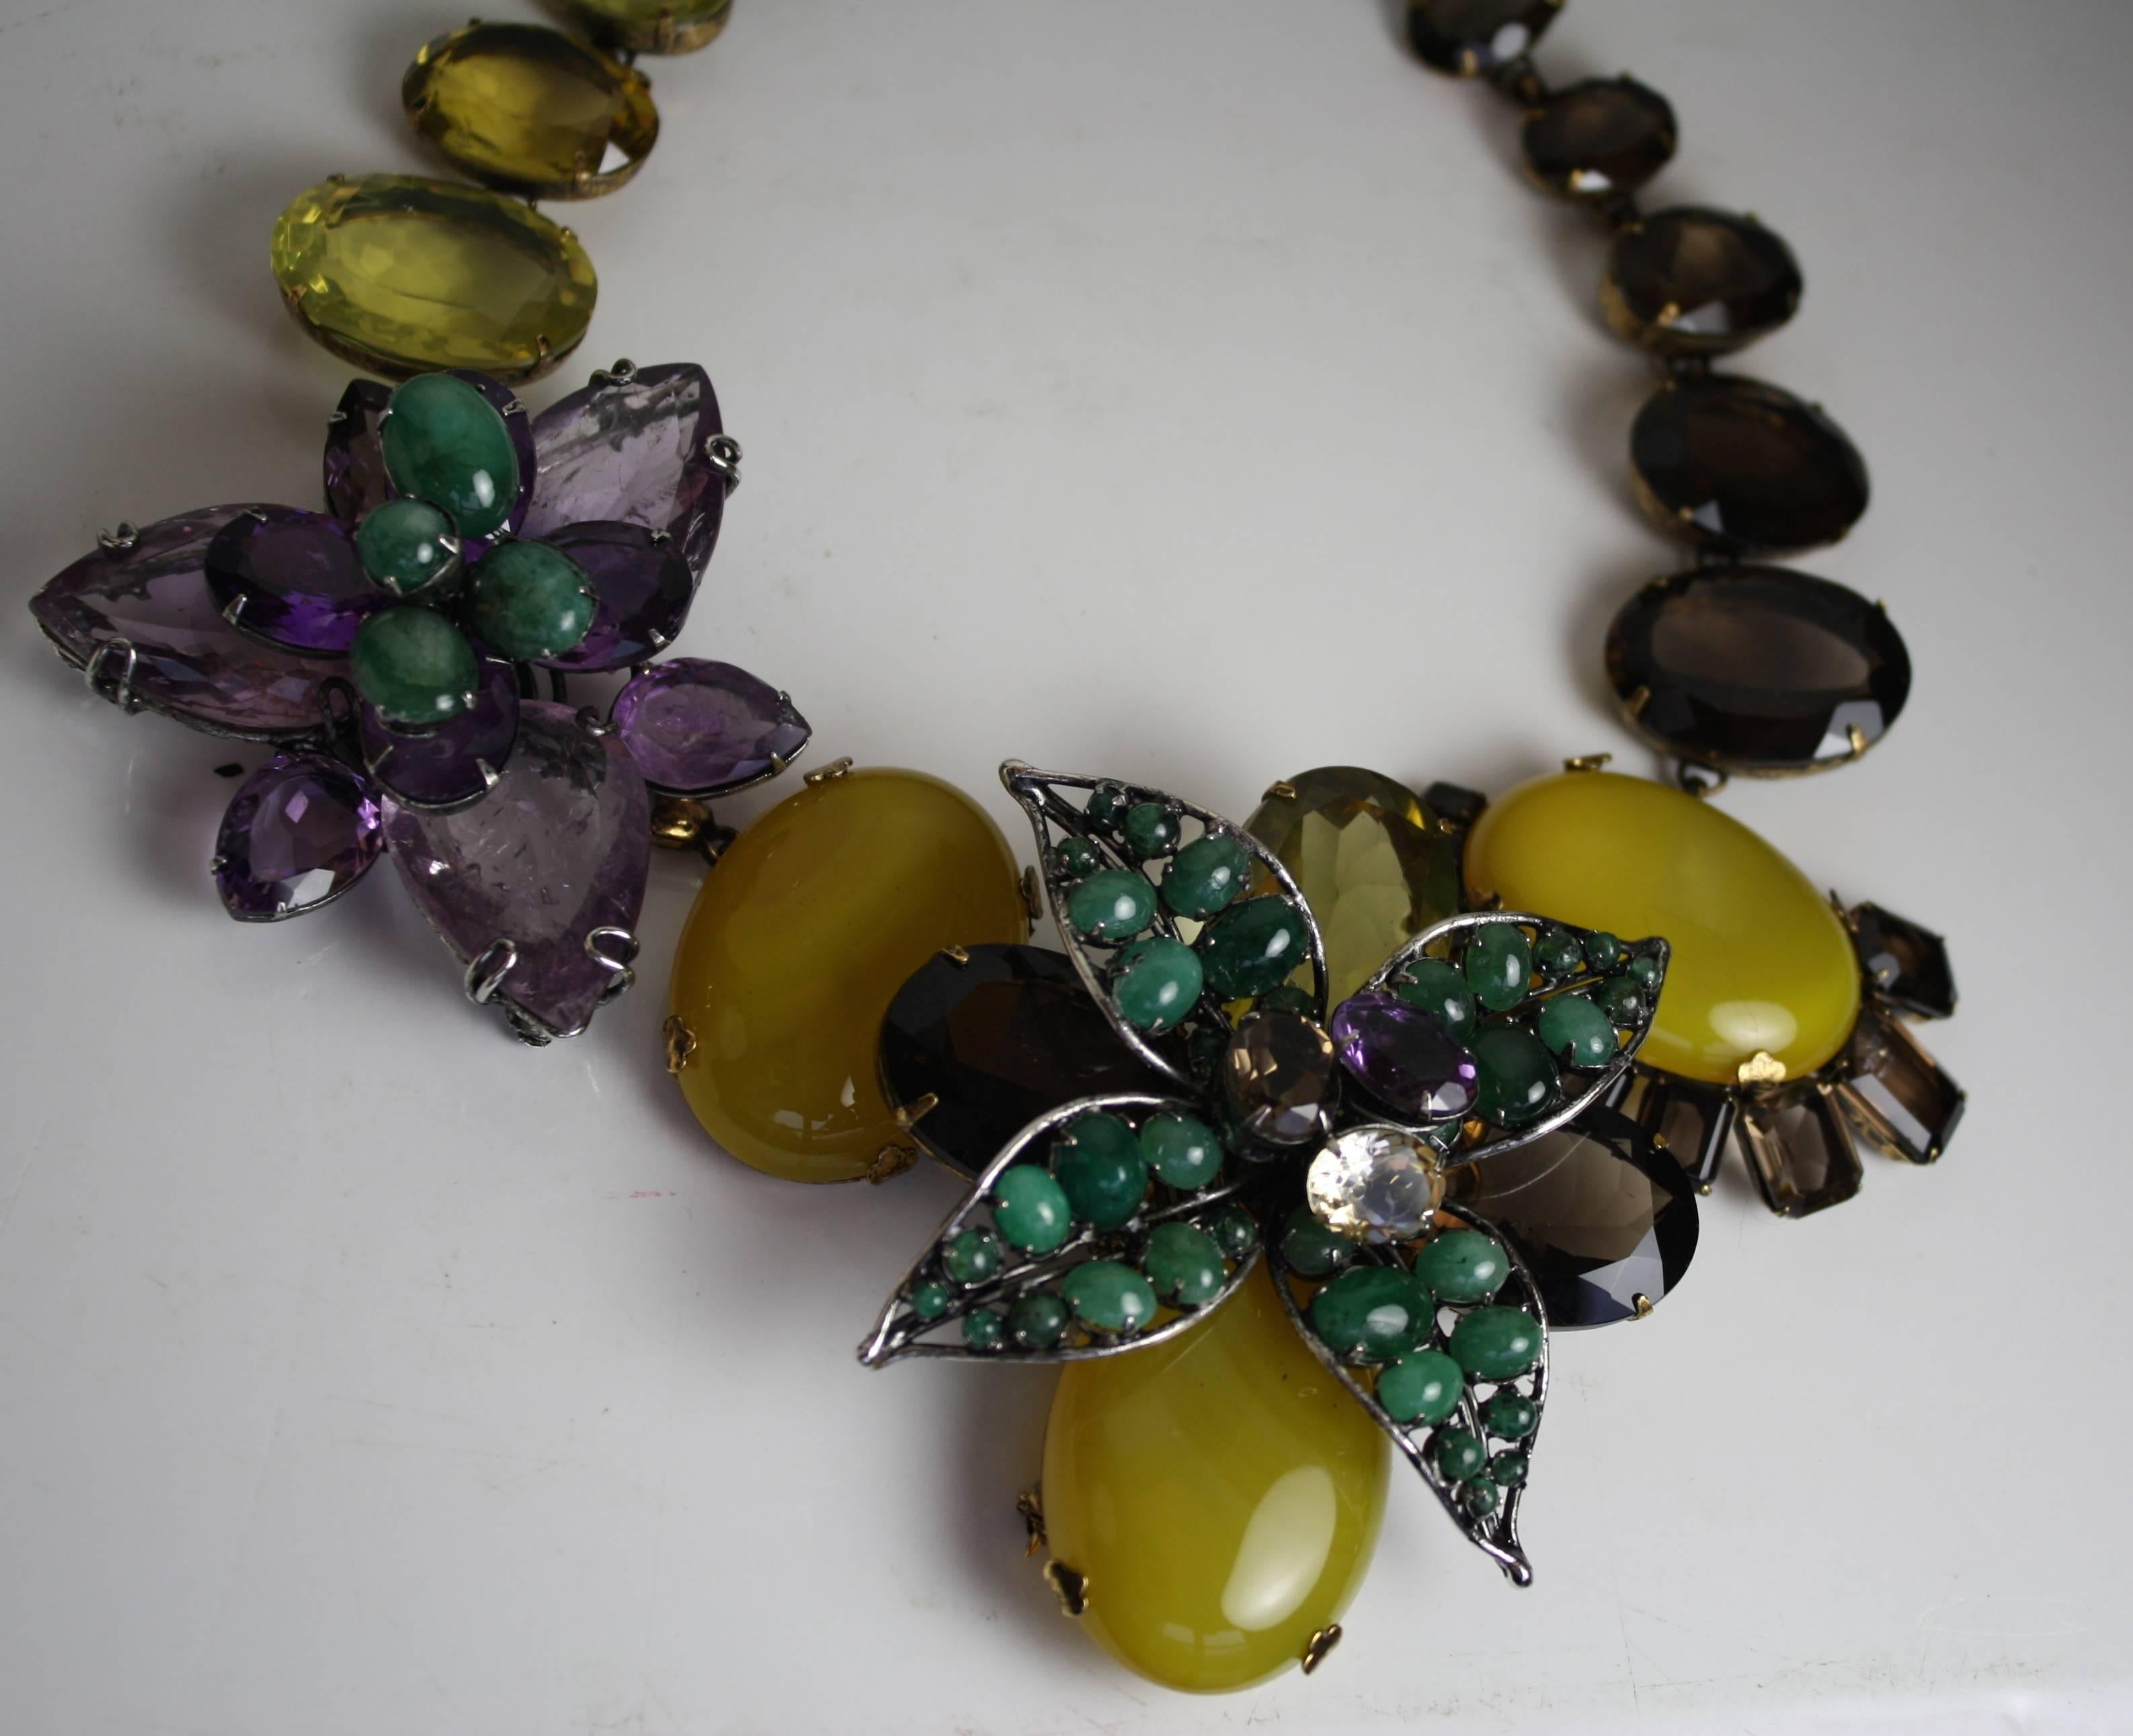 Iradj Moini amethyst, emerald, and quartz double flower choker necklace. Flowers are removable and can be worn separately as pins. 

17.5" width with 3" extra chain
Yellow pin 3" x 3.5"
Purple pin 2.5" x